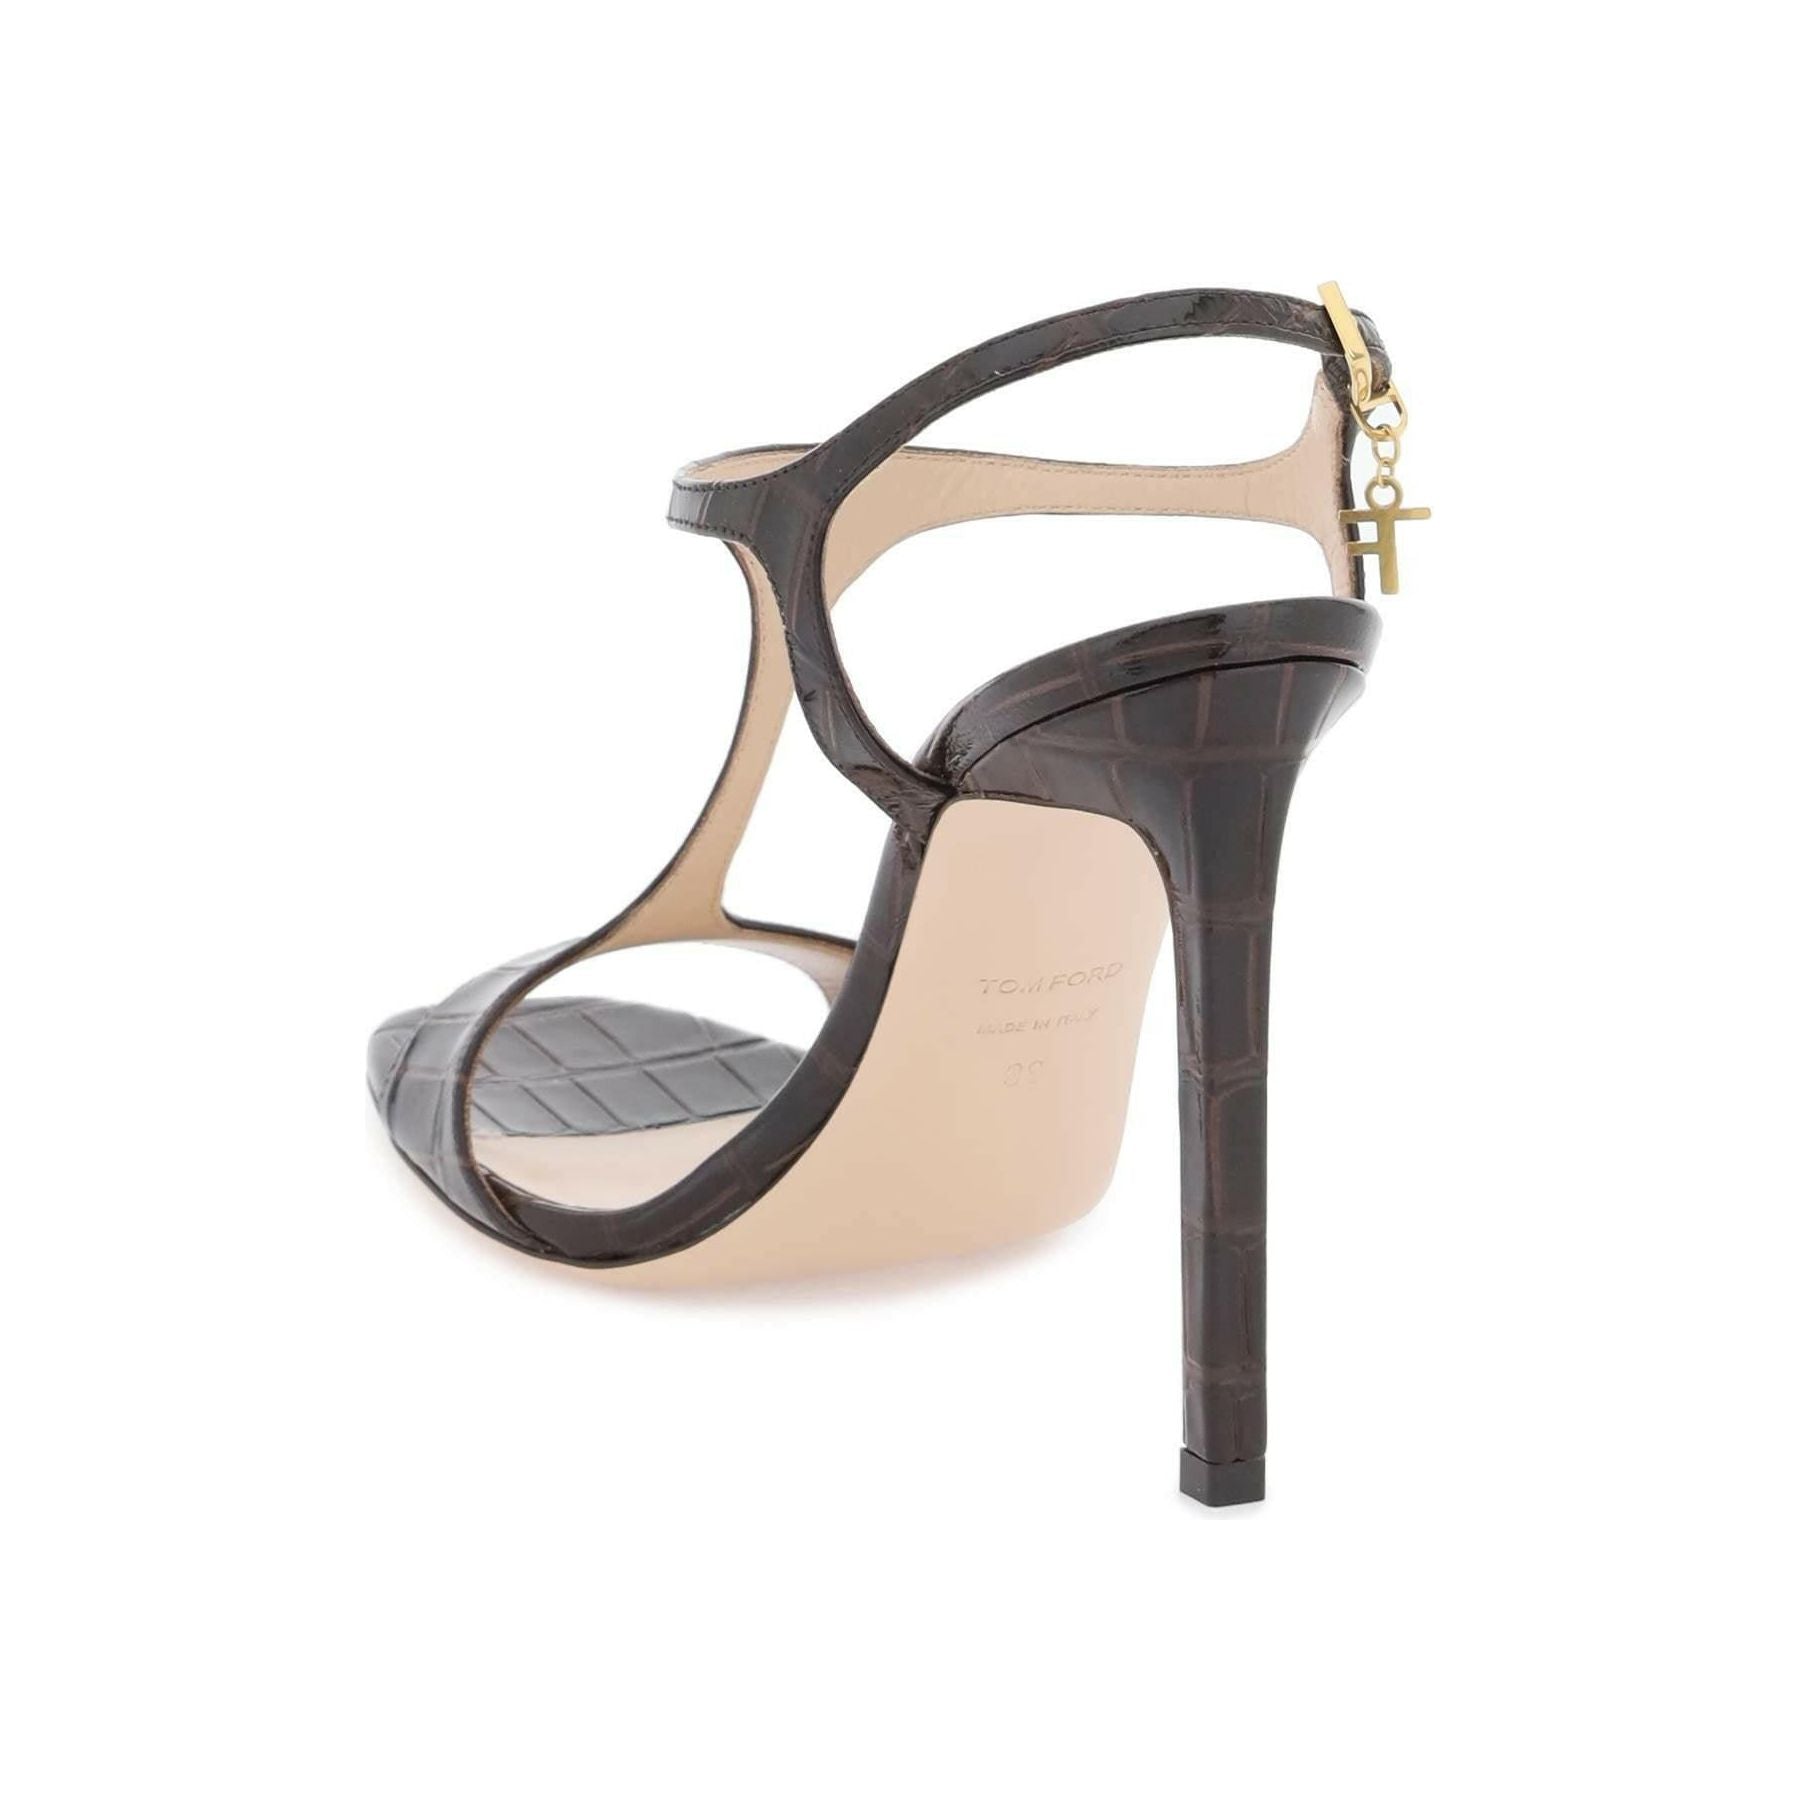 Angelina Sandals In Croco Embossed Glossy Leather TOM FORD JOHN JULIA.